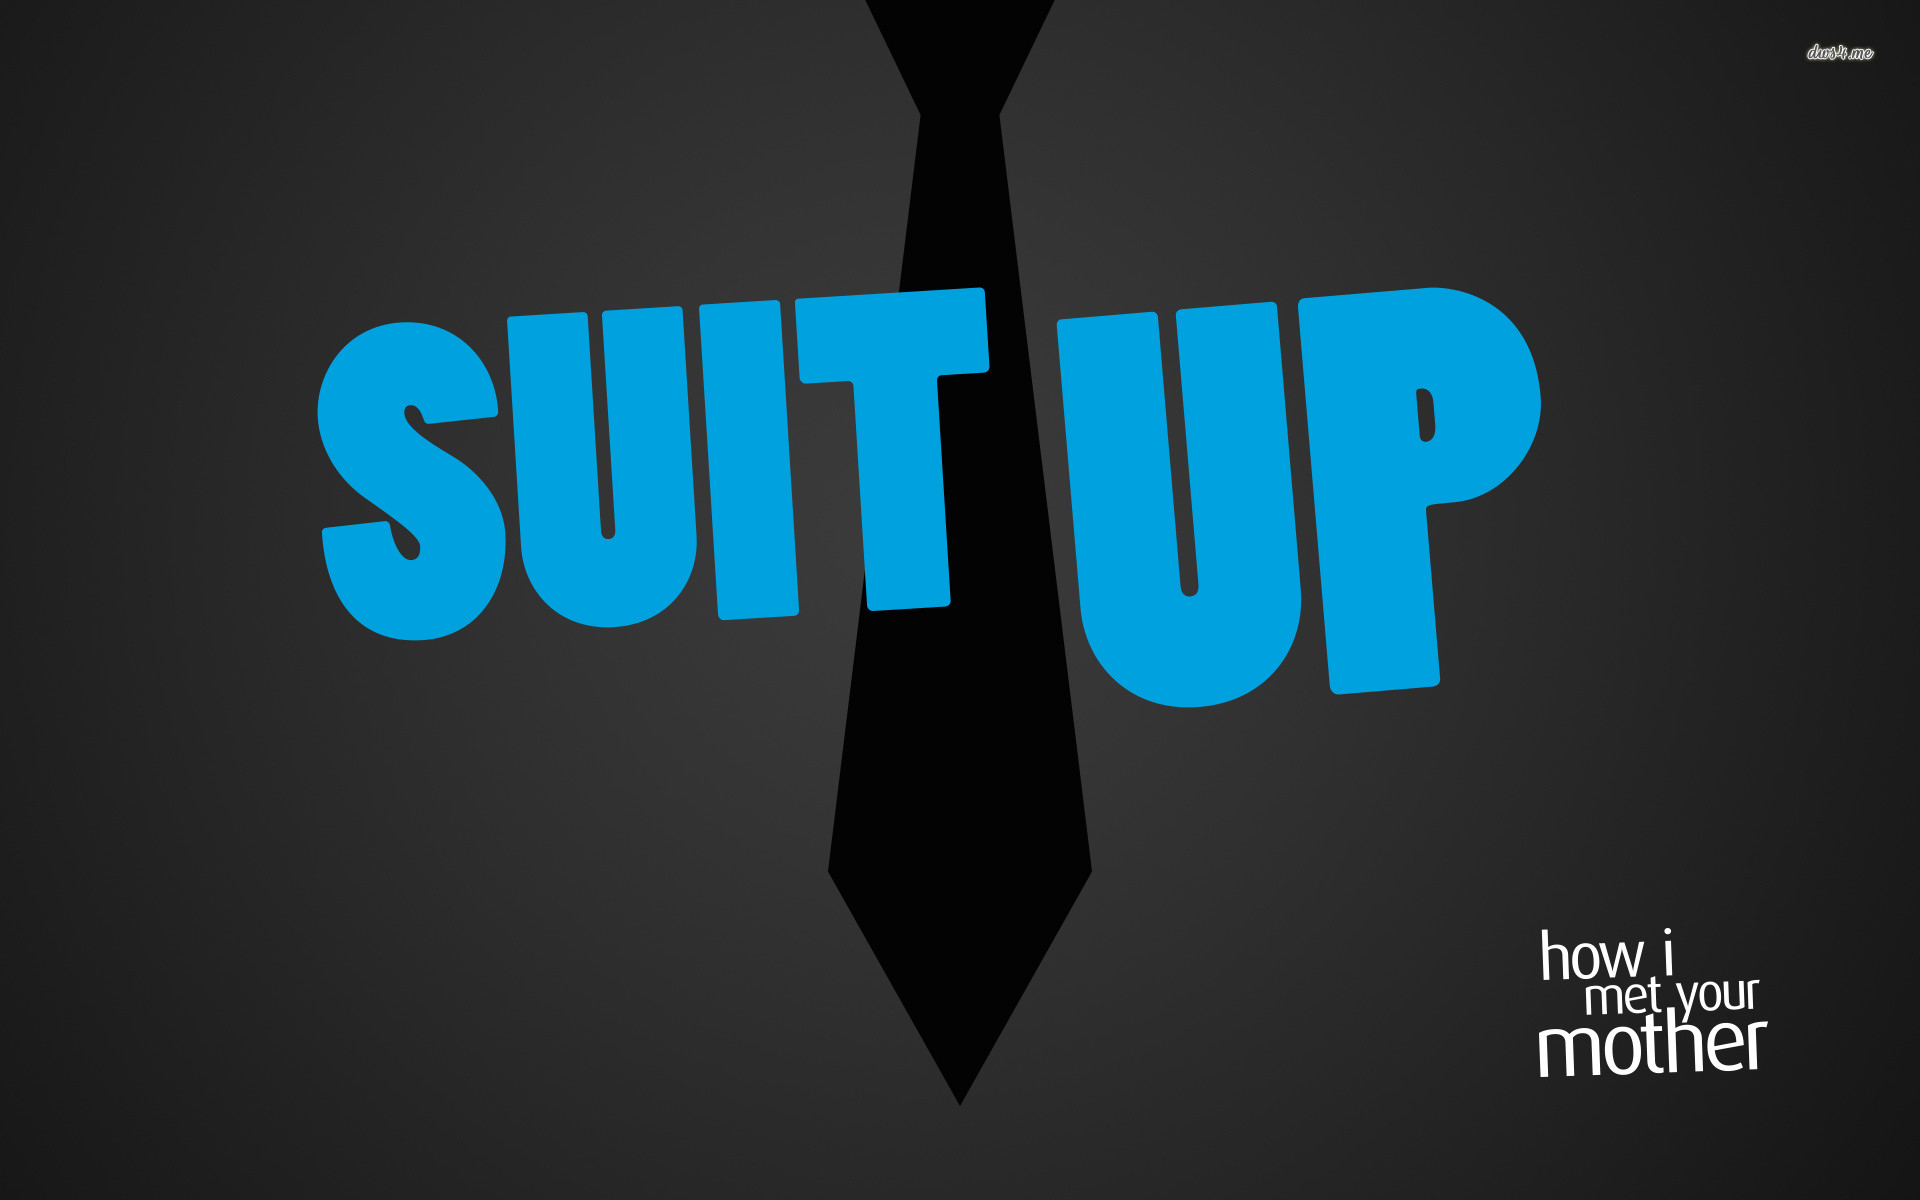 1920x1200 ... Suit up, Barney Stinson - How I Met Your Mother wallpaper  ...